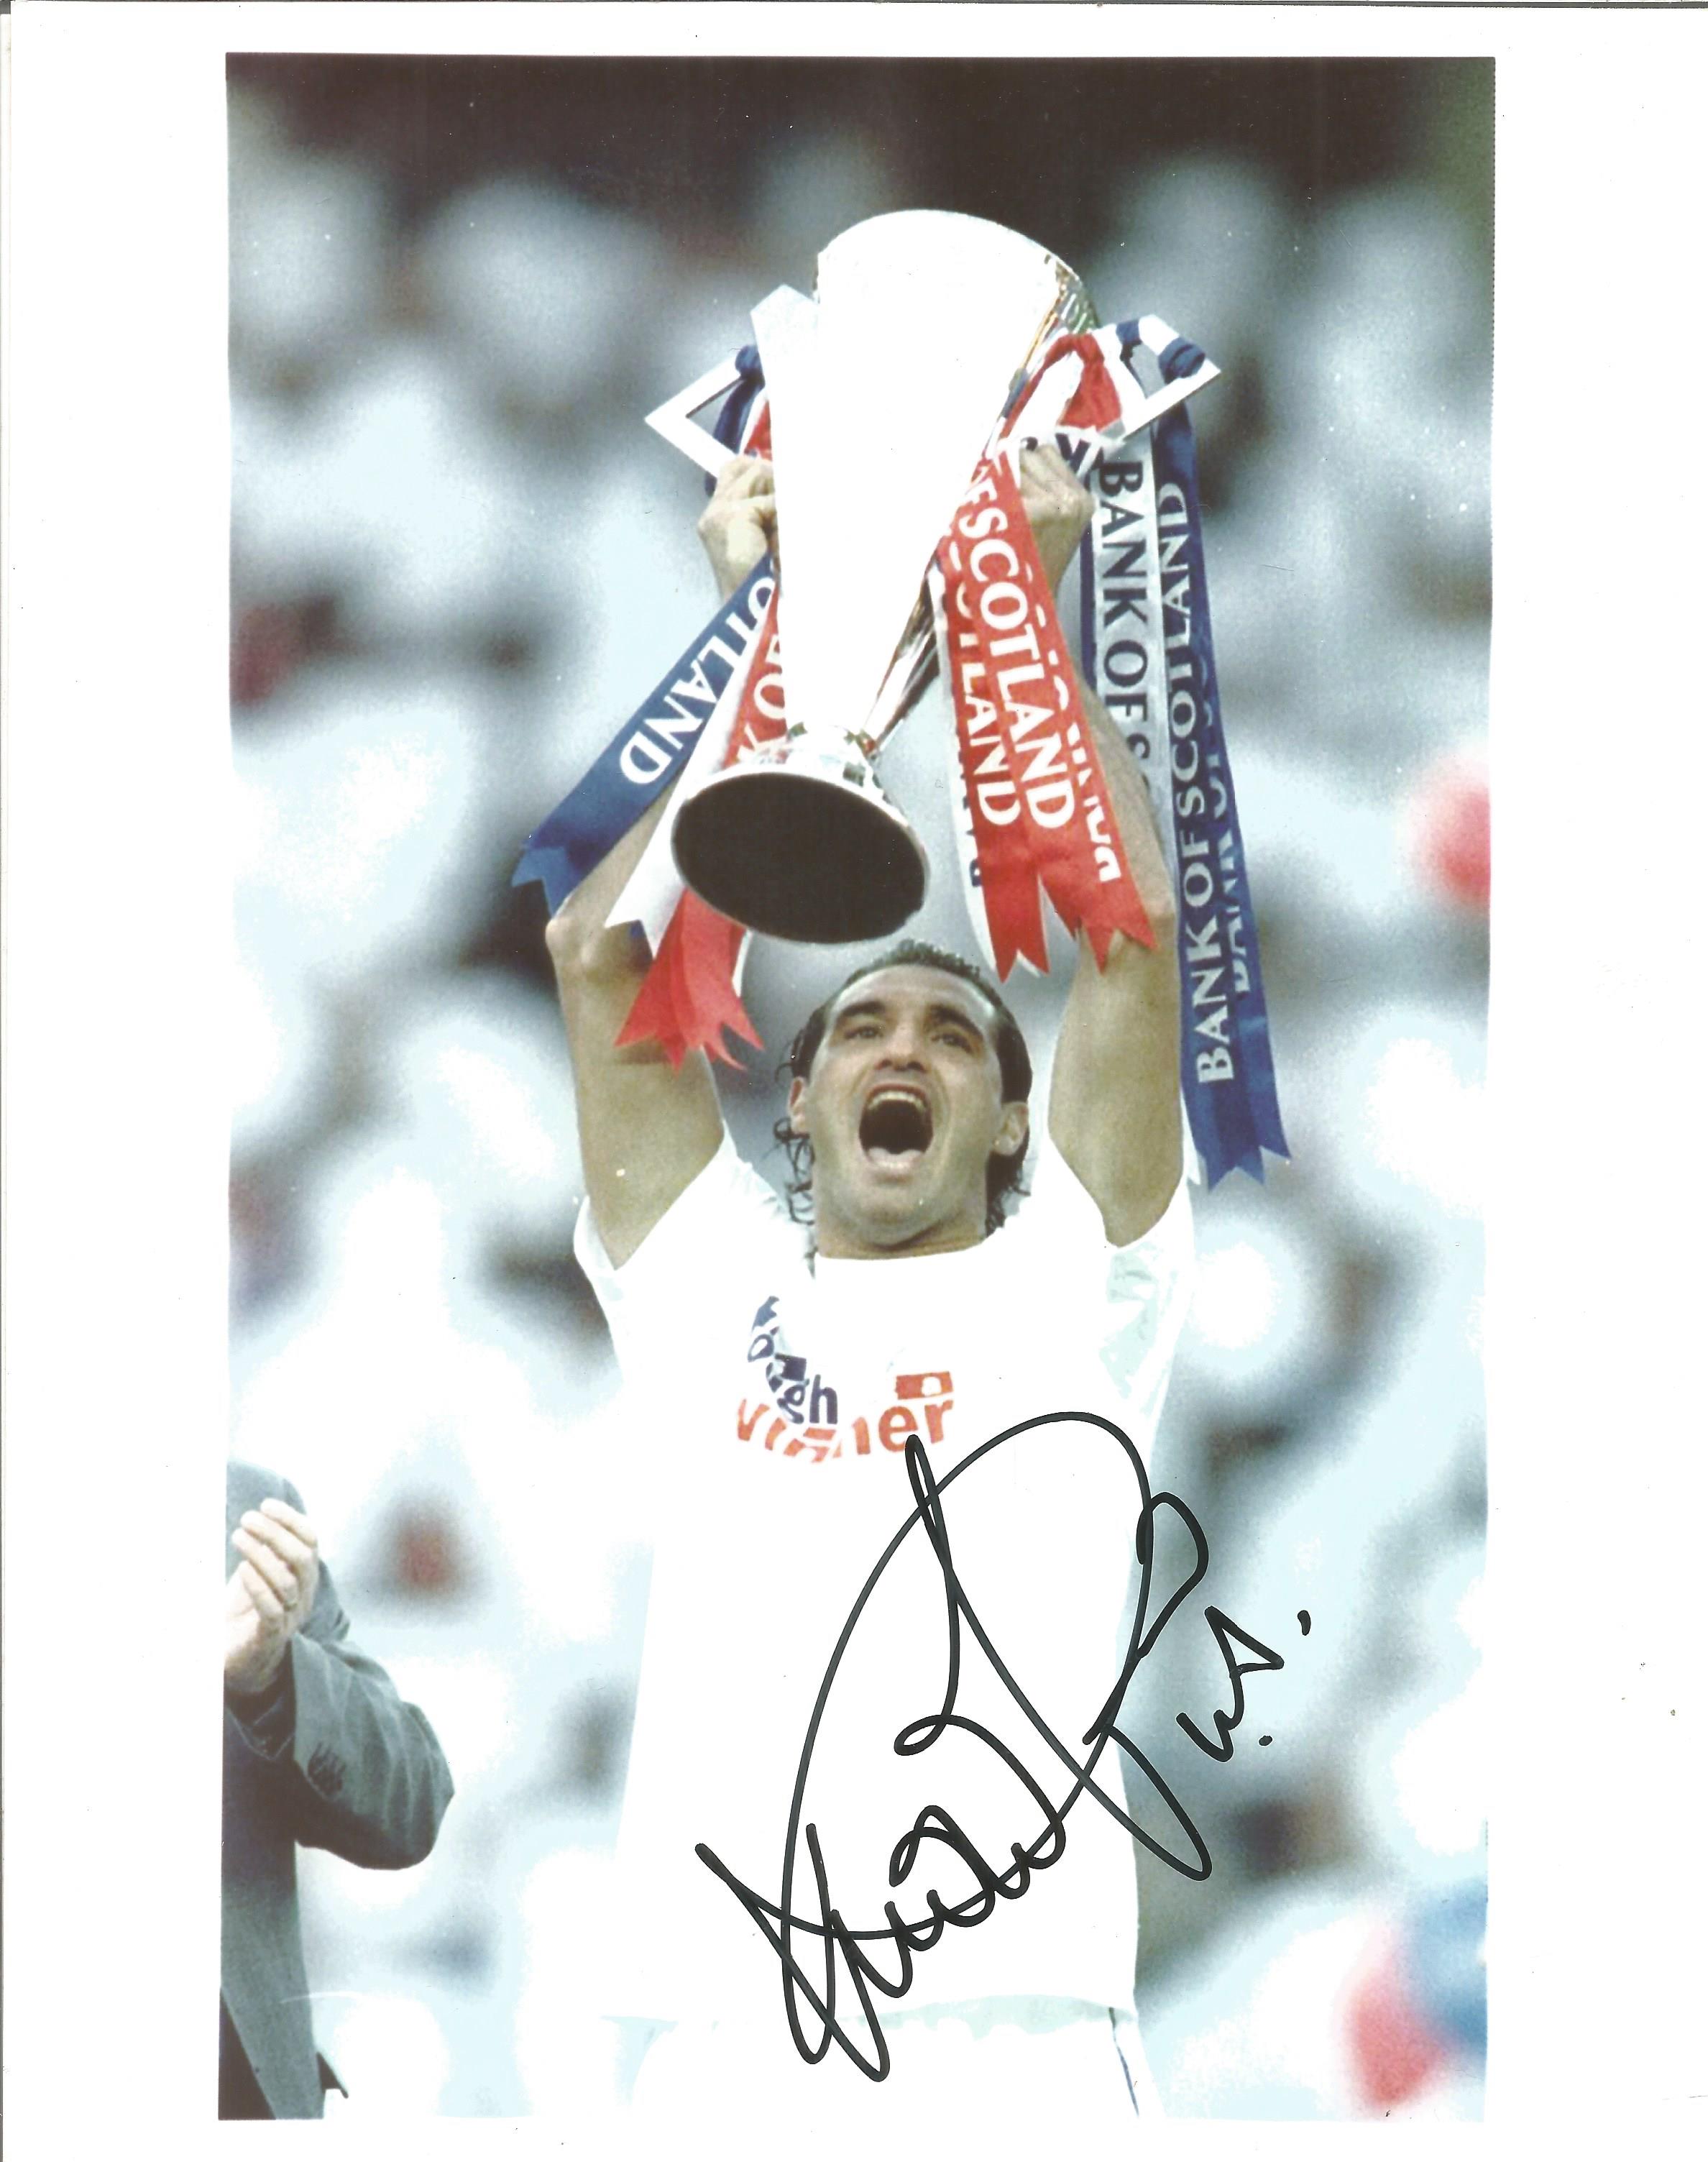 Lorenzo Amoruso Signed Glasgow Rangers Cup 8x10 Photo. Good condition. All autographs come with a